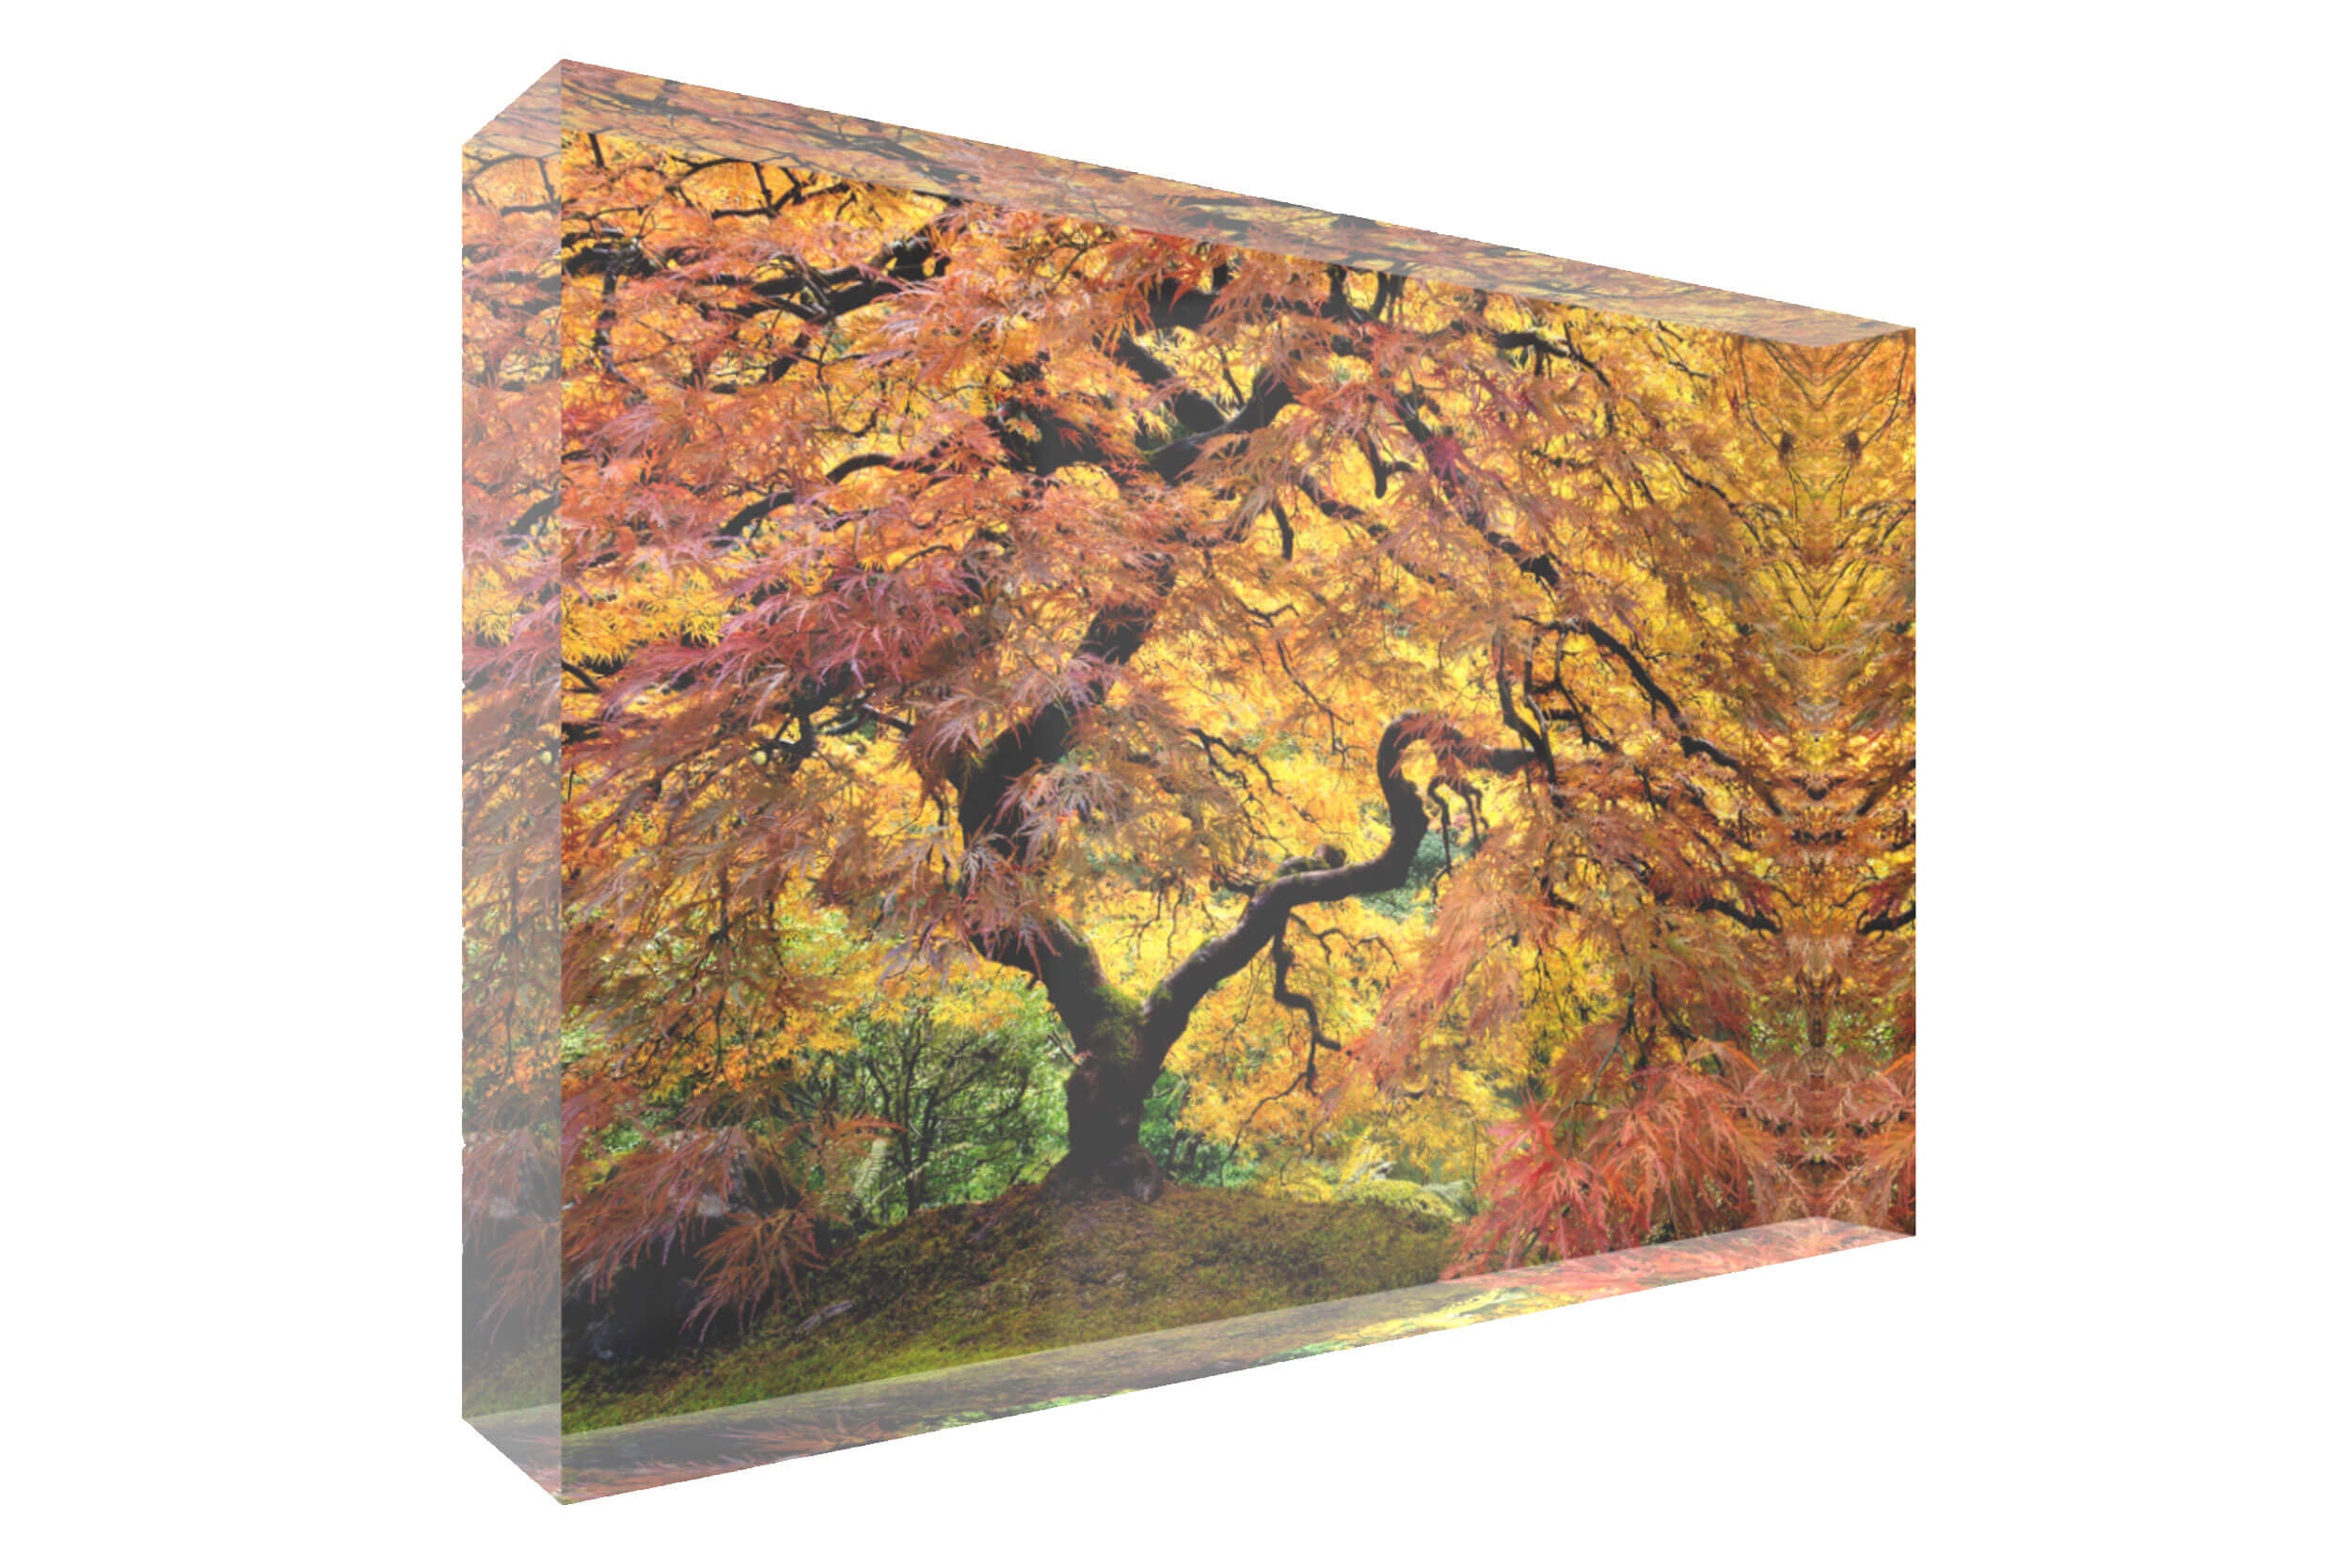 A picture of the famous maple tree in Portland Japanese Garden shown as an acrylic block.